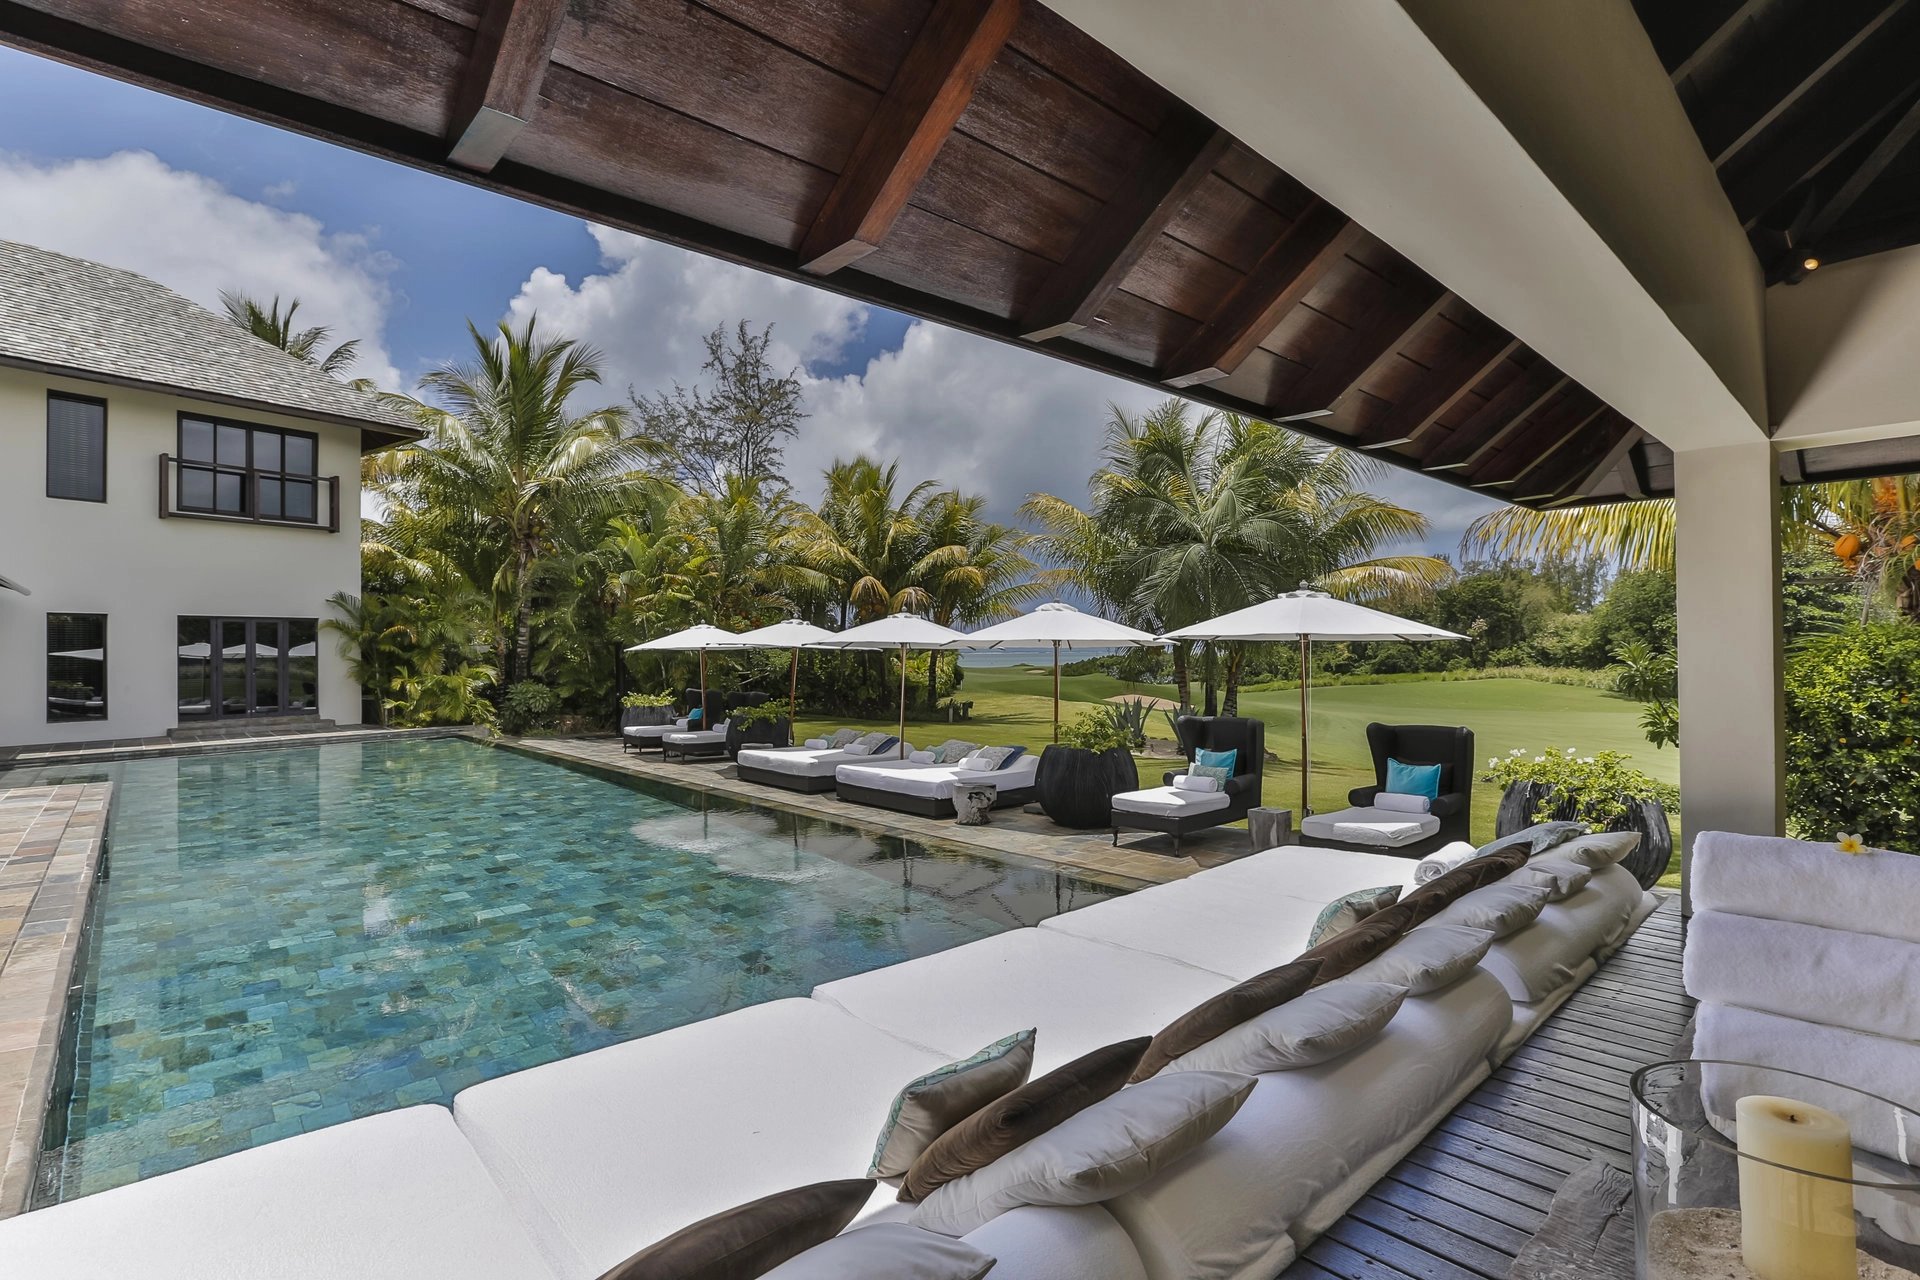 Enjoy the resale of this luxurious Villa